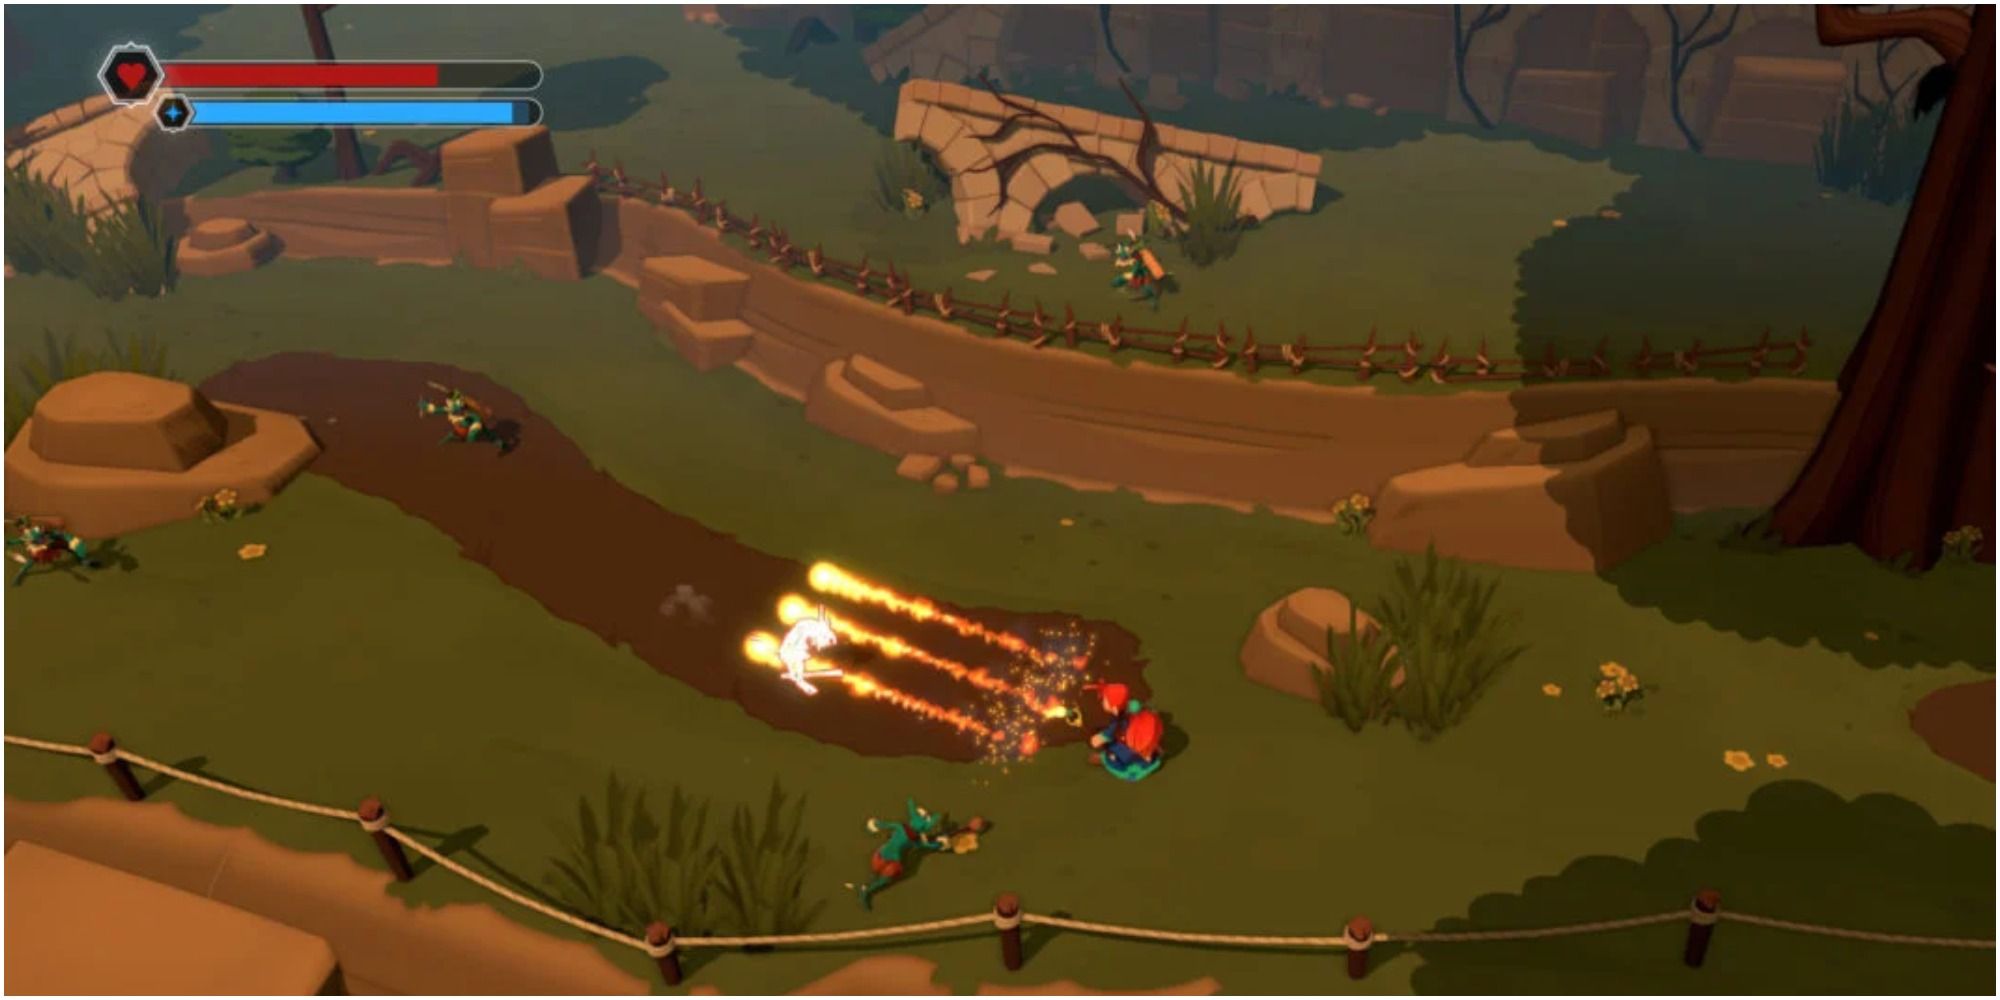 Zia from Mages of Mystralia using a Fire magic volley